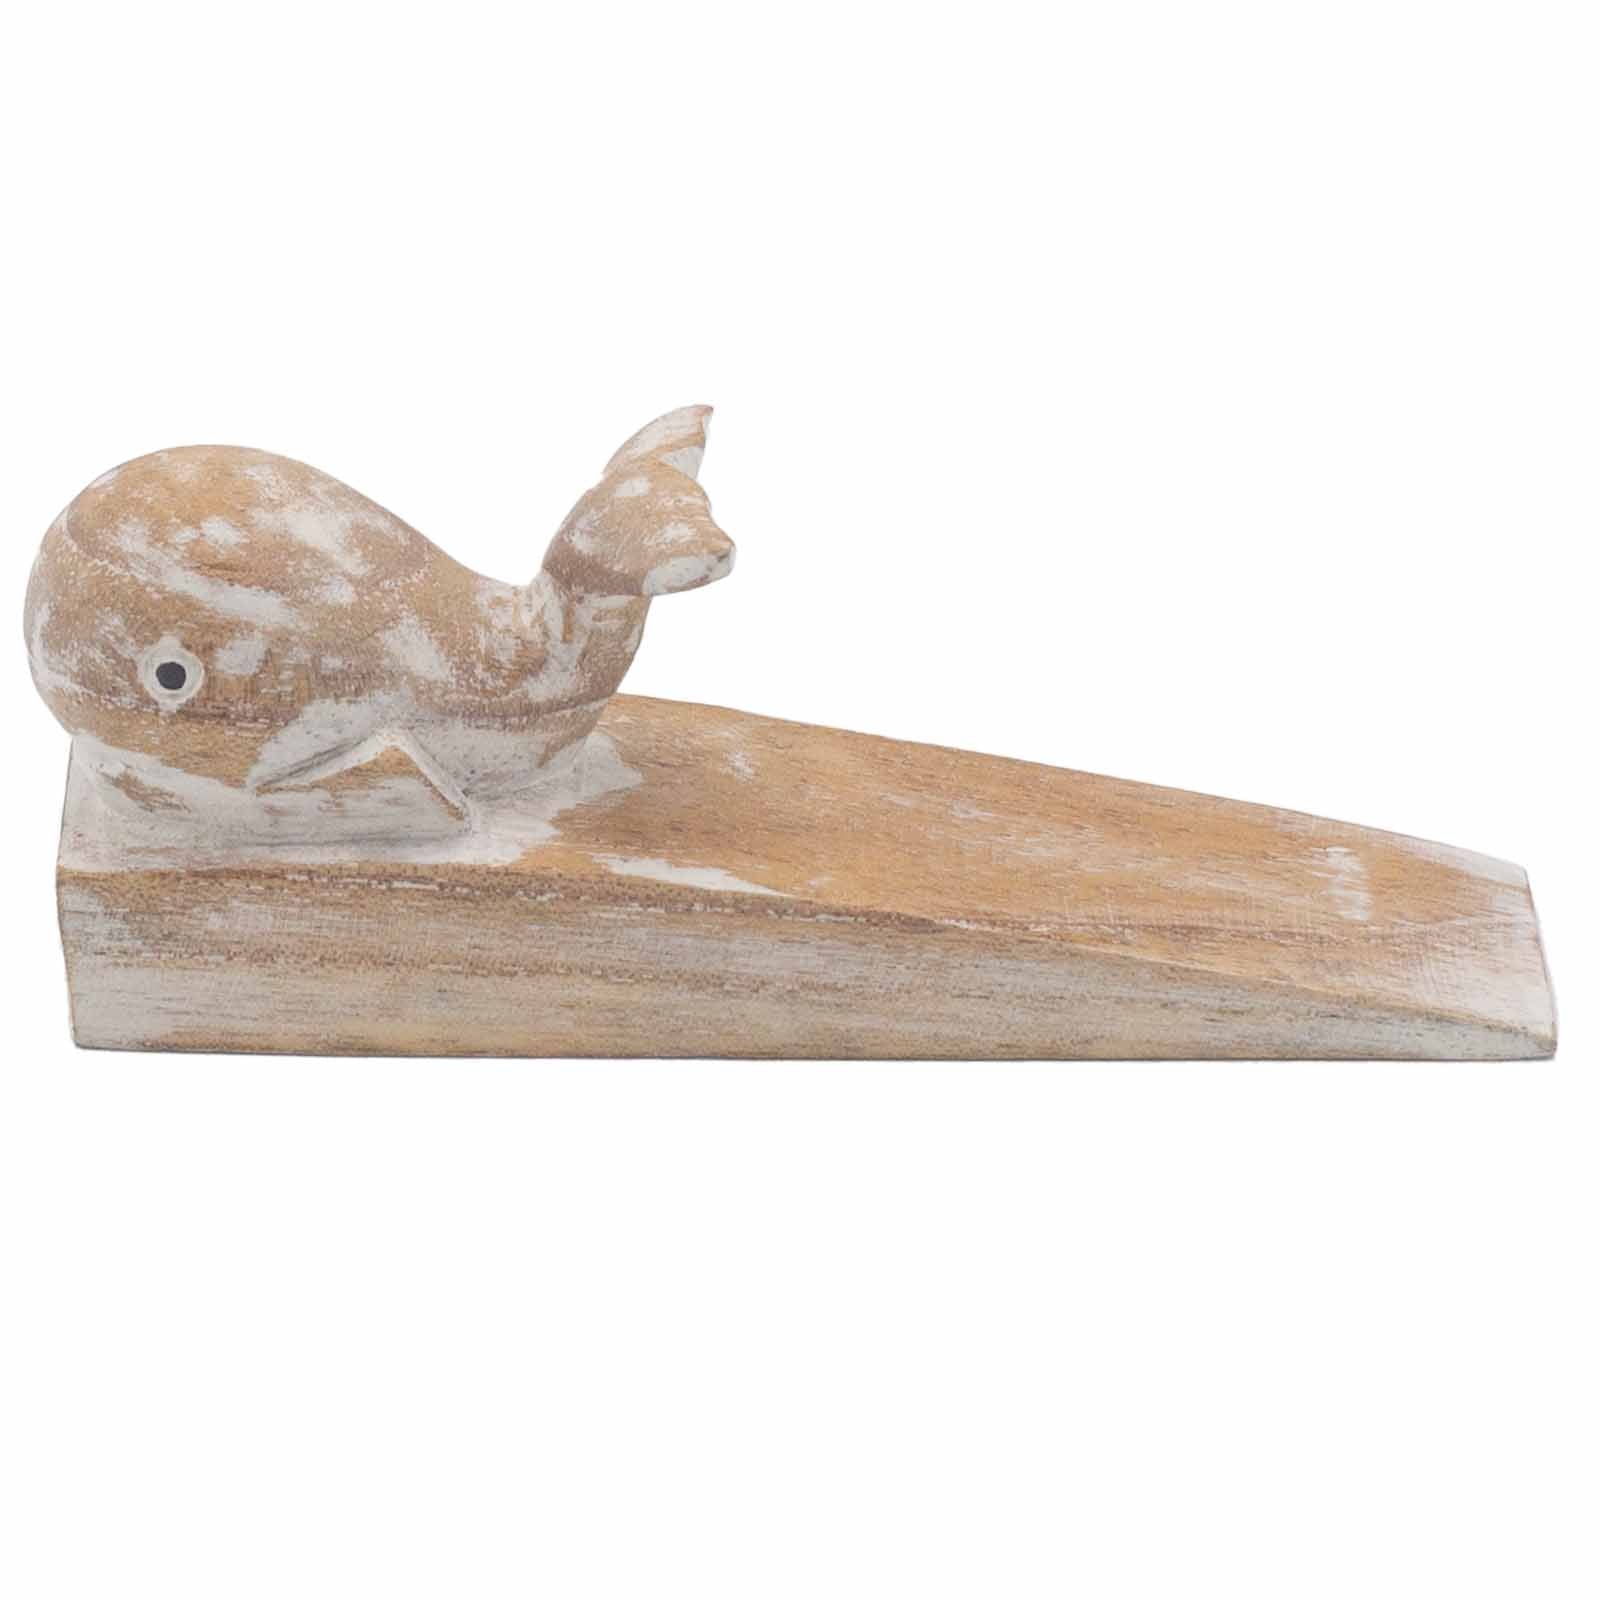 View Hand carved Doorstop Whale information